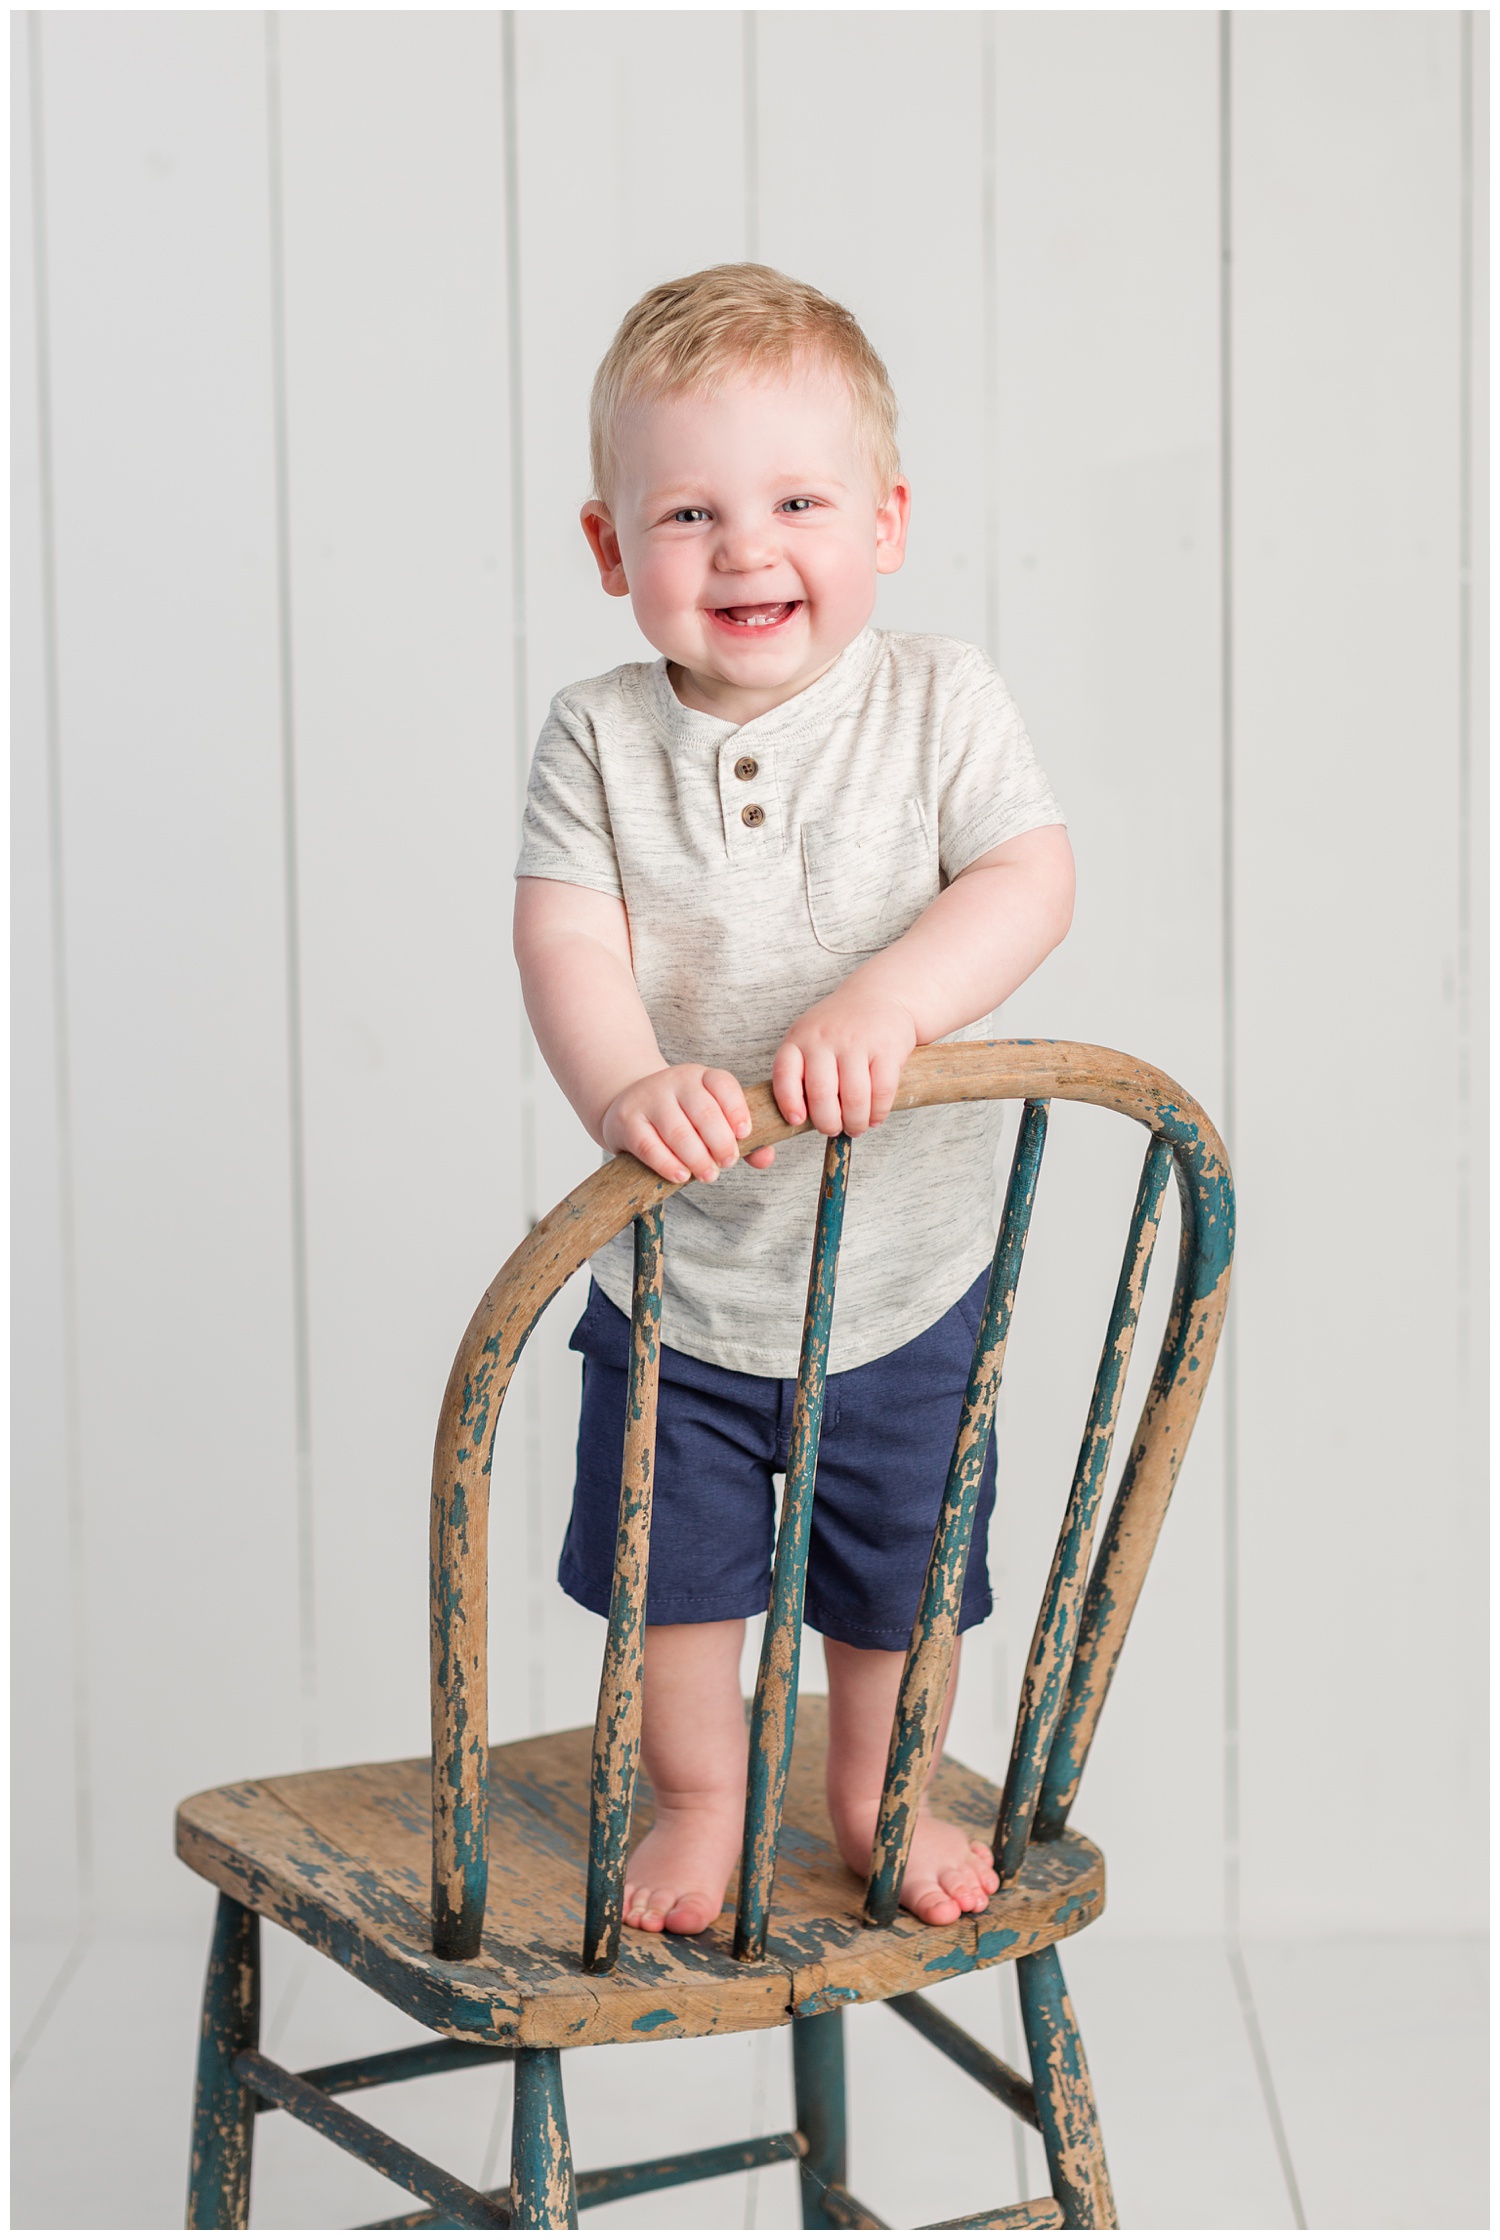 Baby Carter standing on a rustic navy chair wearing a heather gray shirt and navy shorts smiling for his first birthday photo | CB Studio